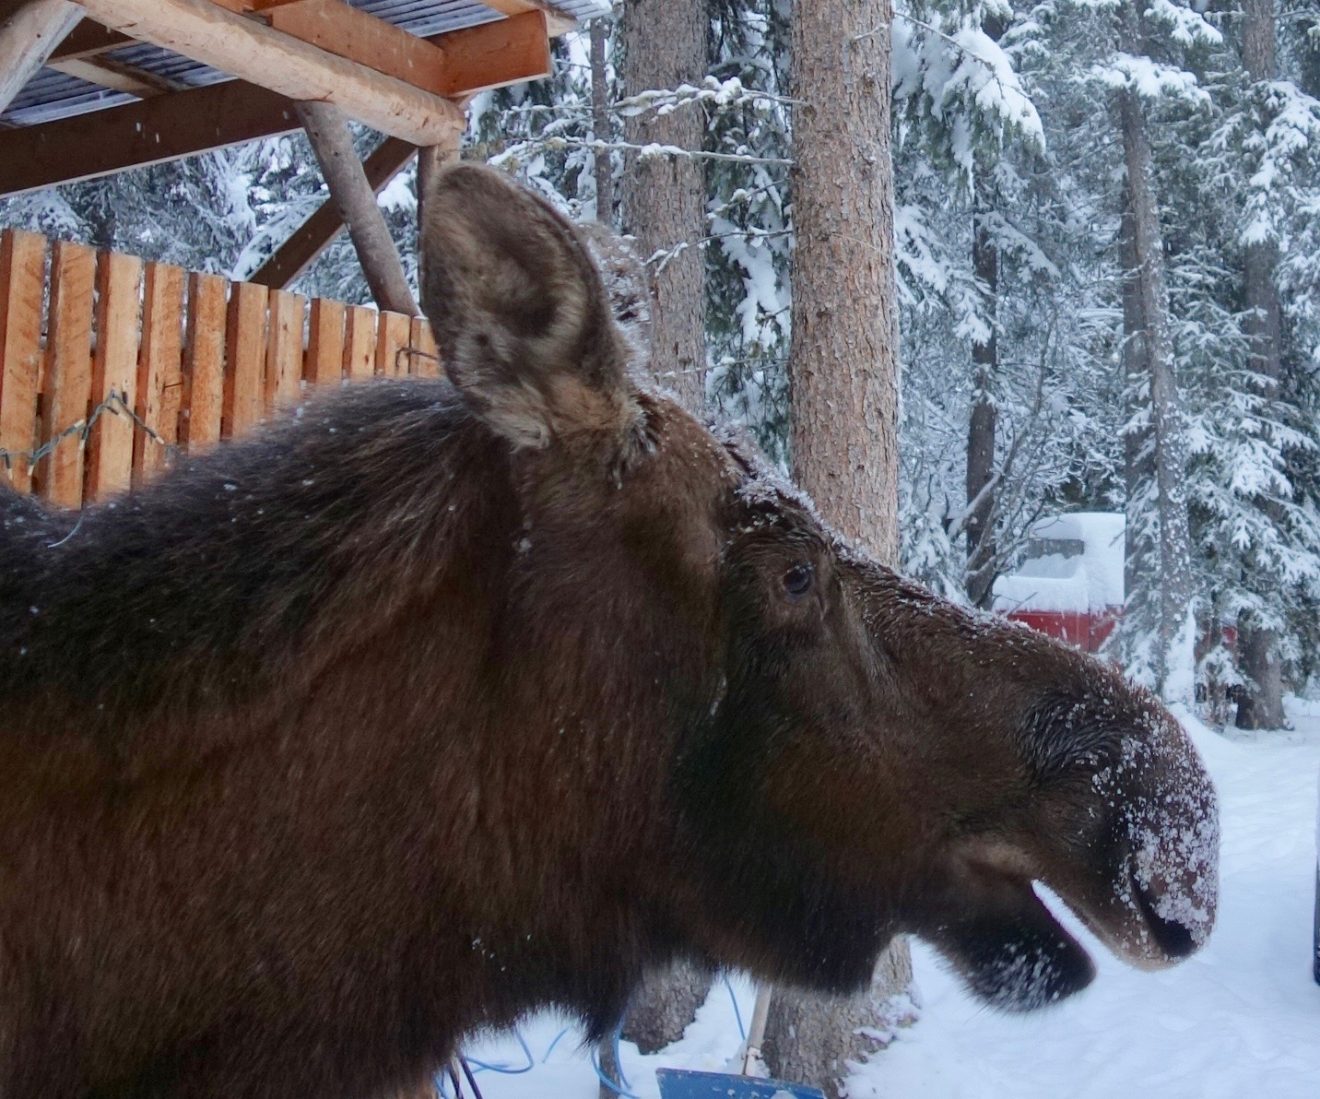 What’s the purpose of a moose’s long nose?